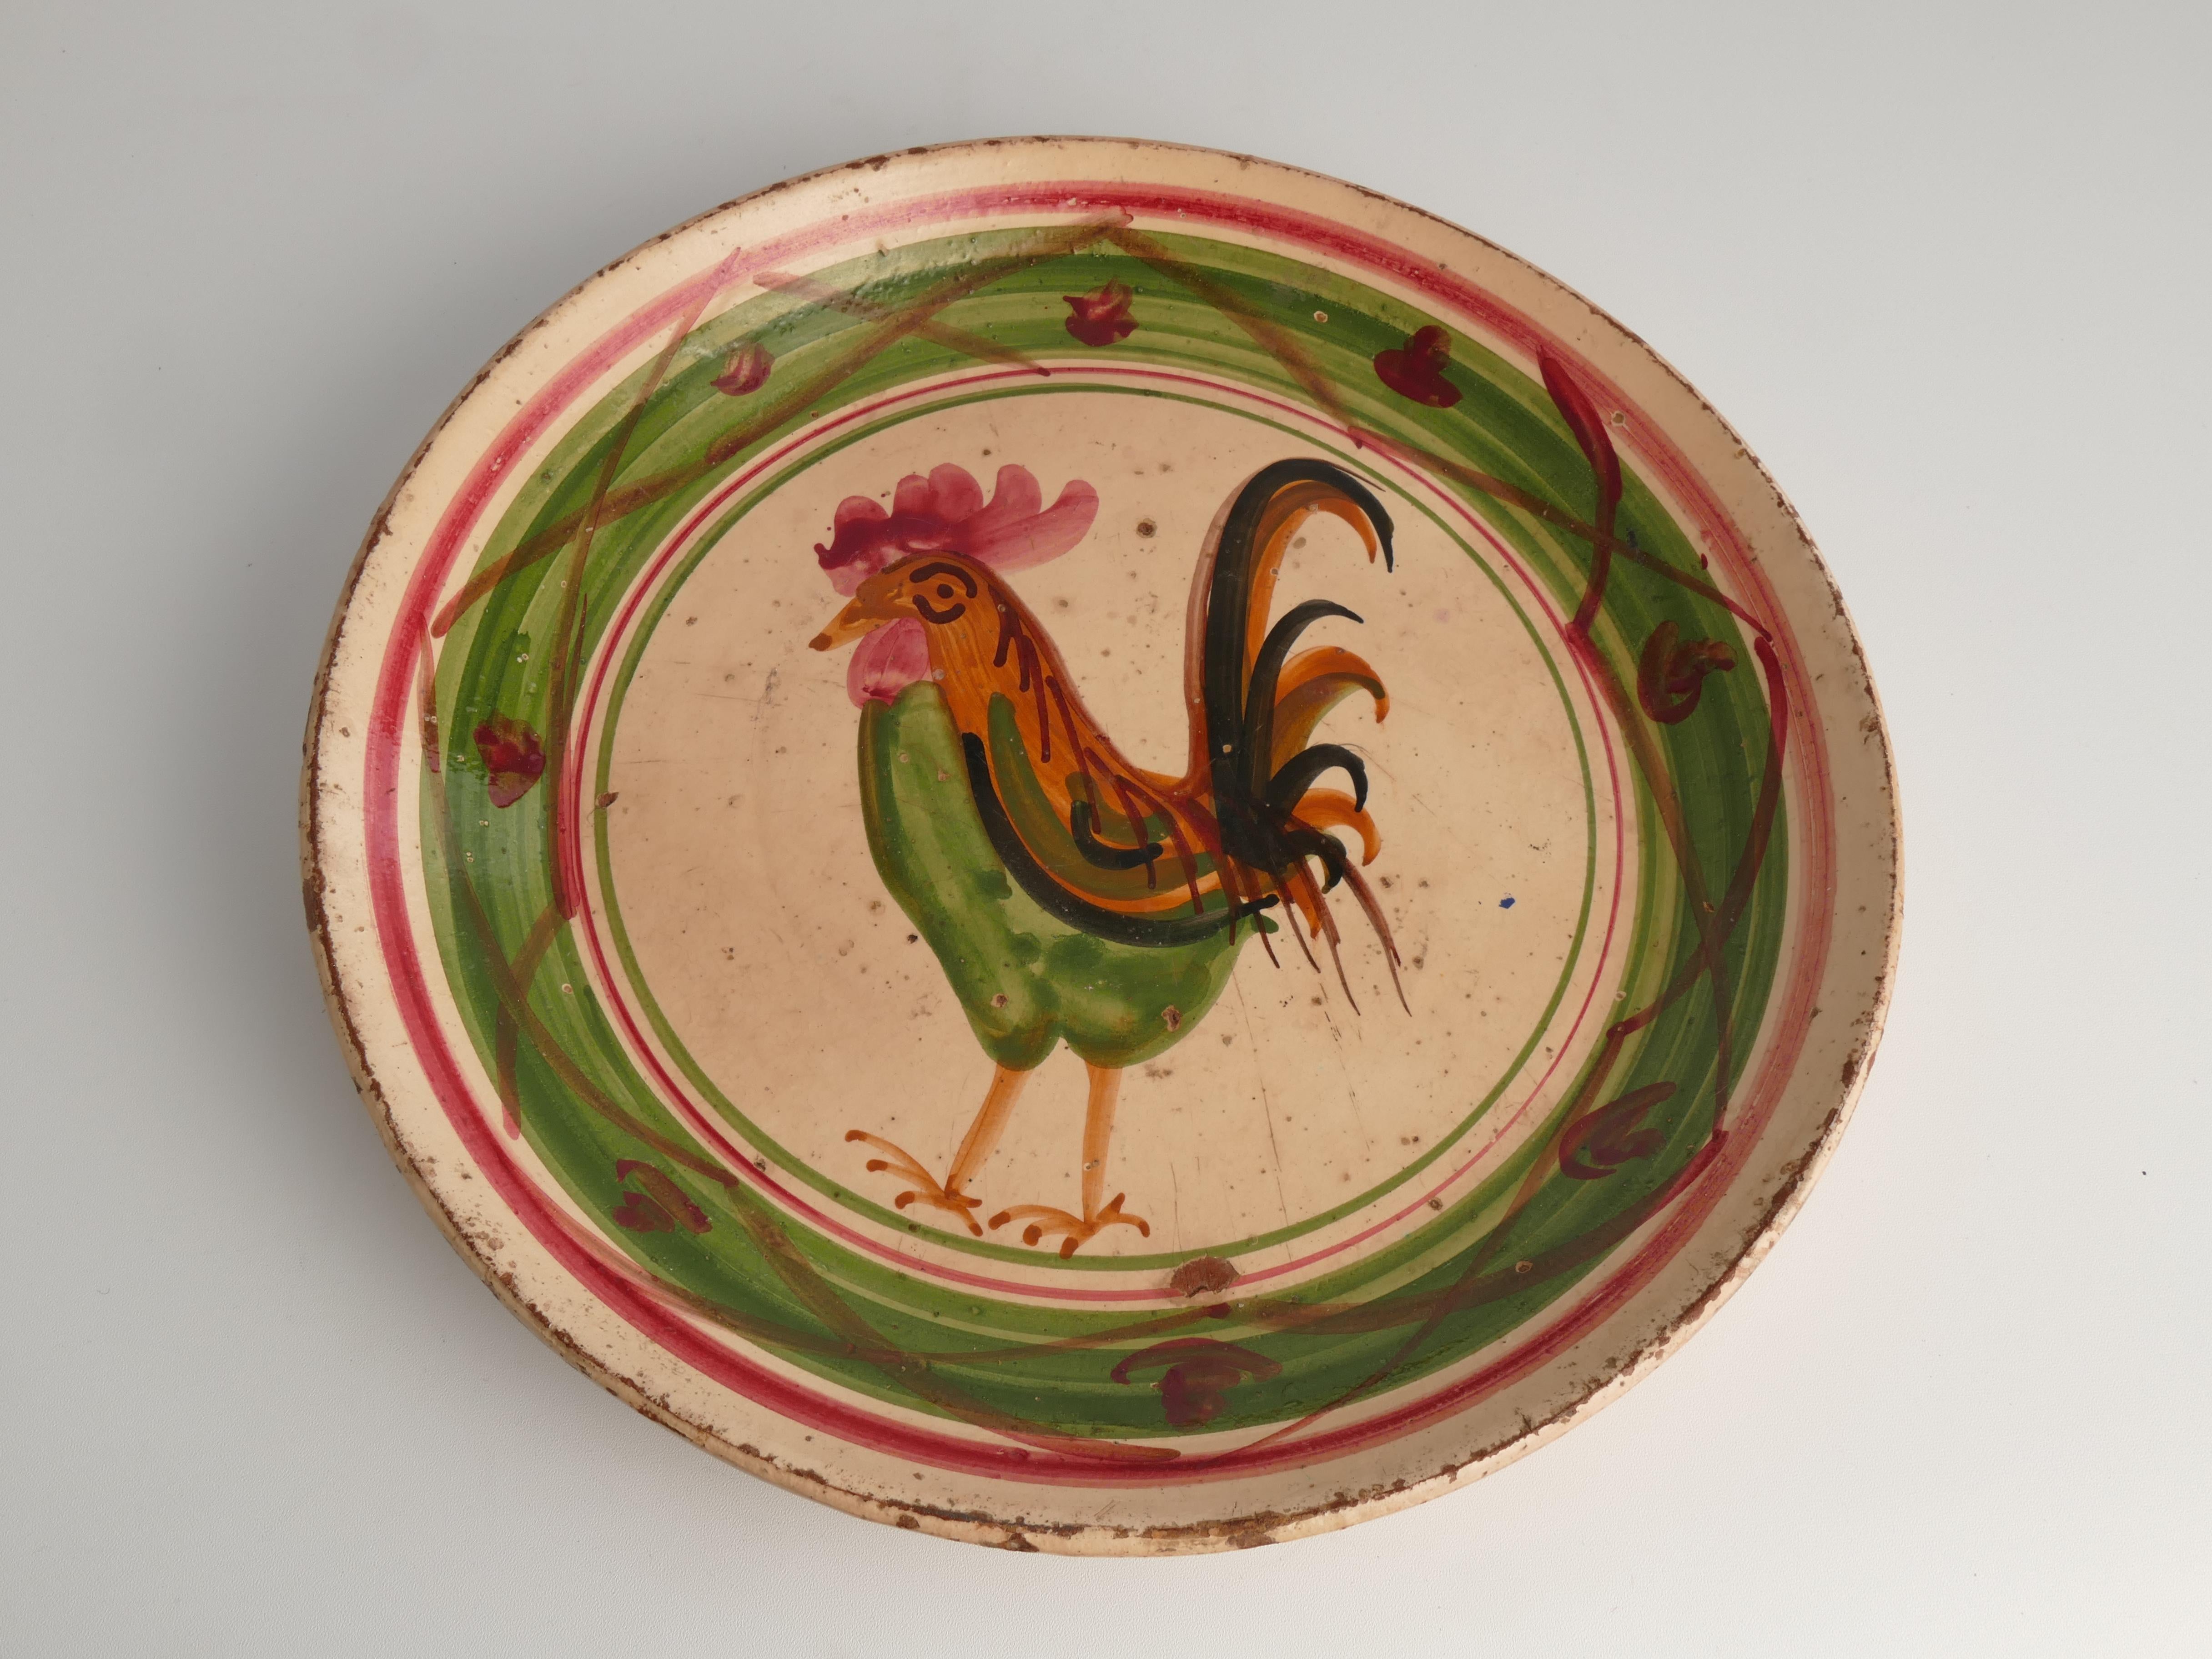 Glazed 19th Century Swedish Folk Art Milk Bowl with Rooster Motif in Red, Green, and Br For Sale